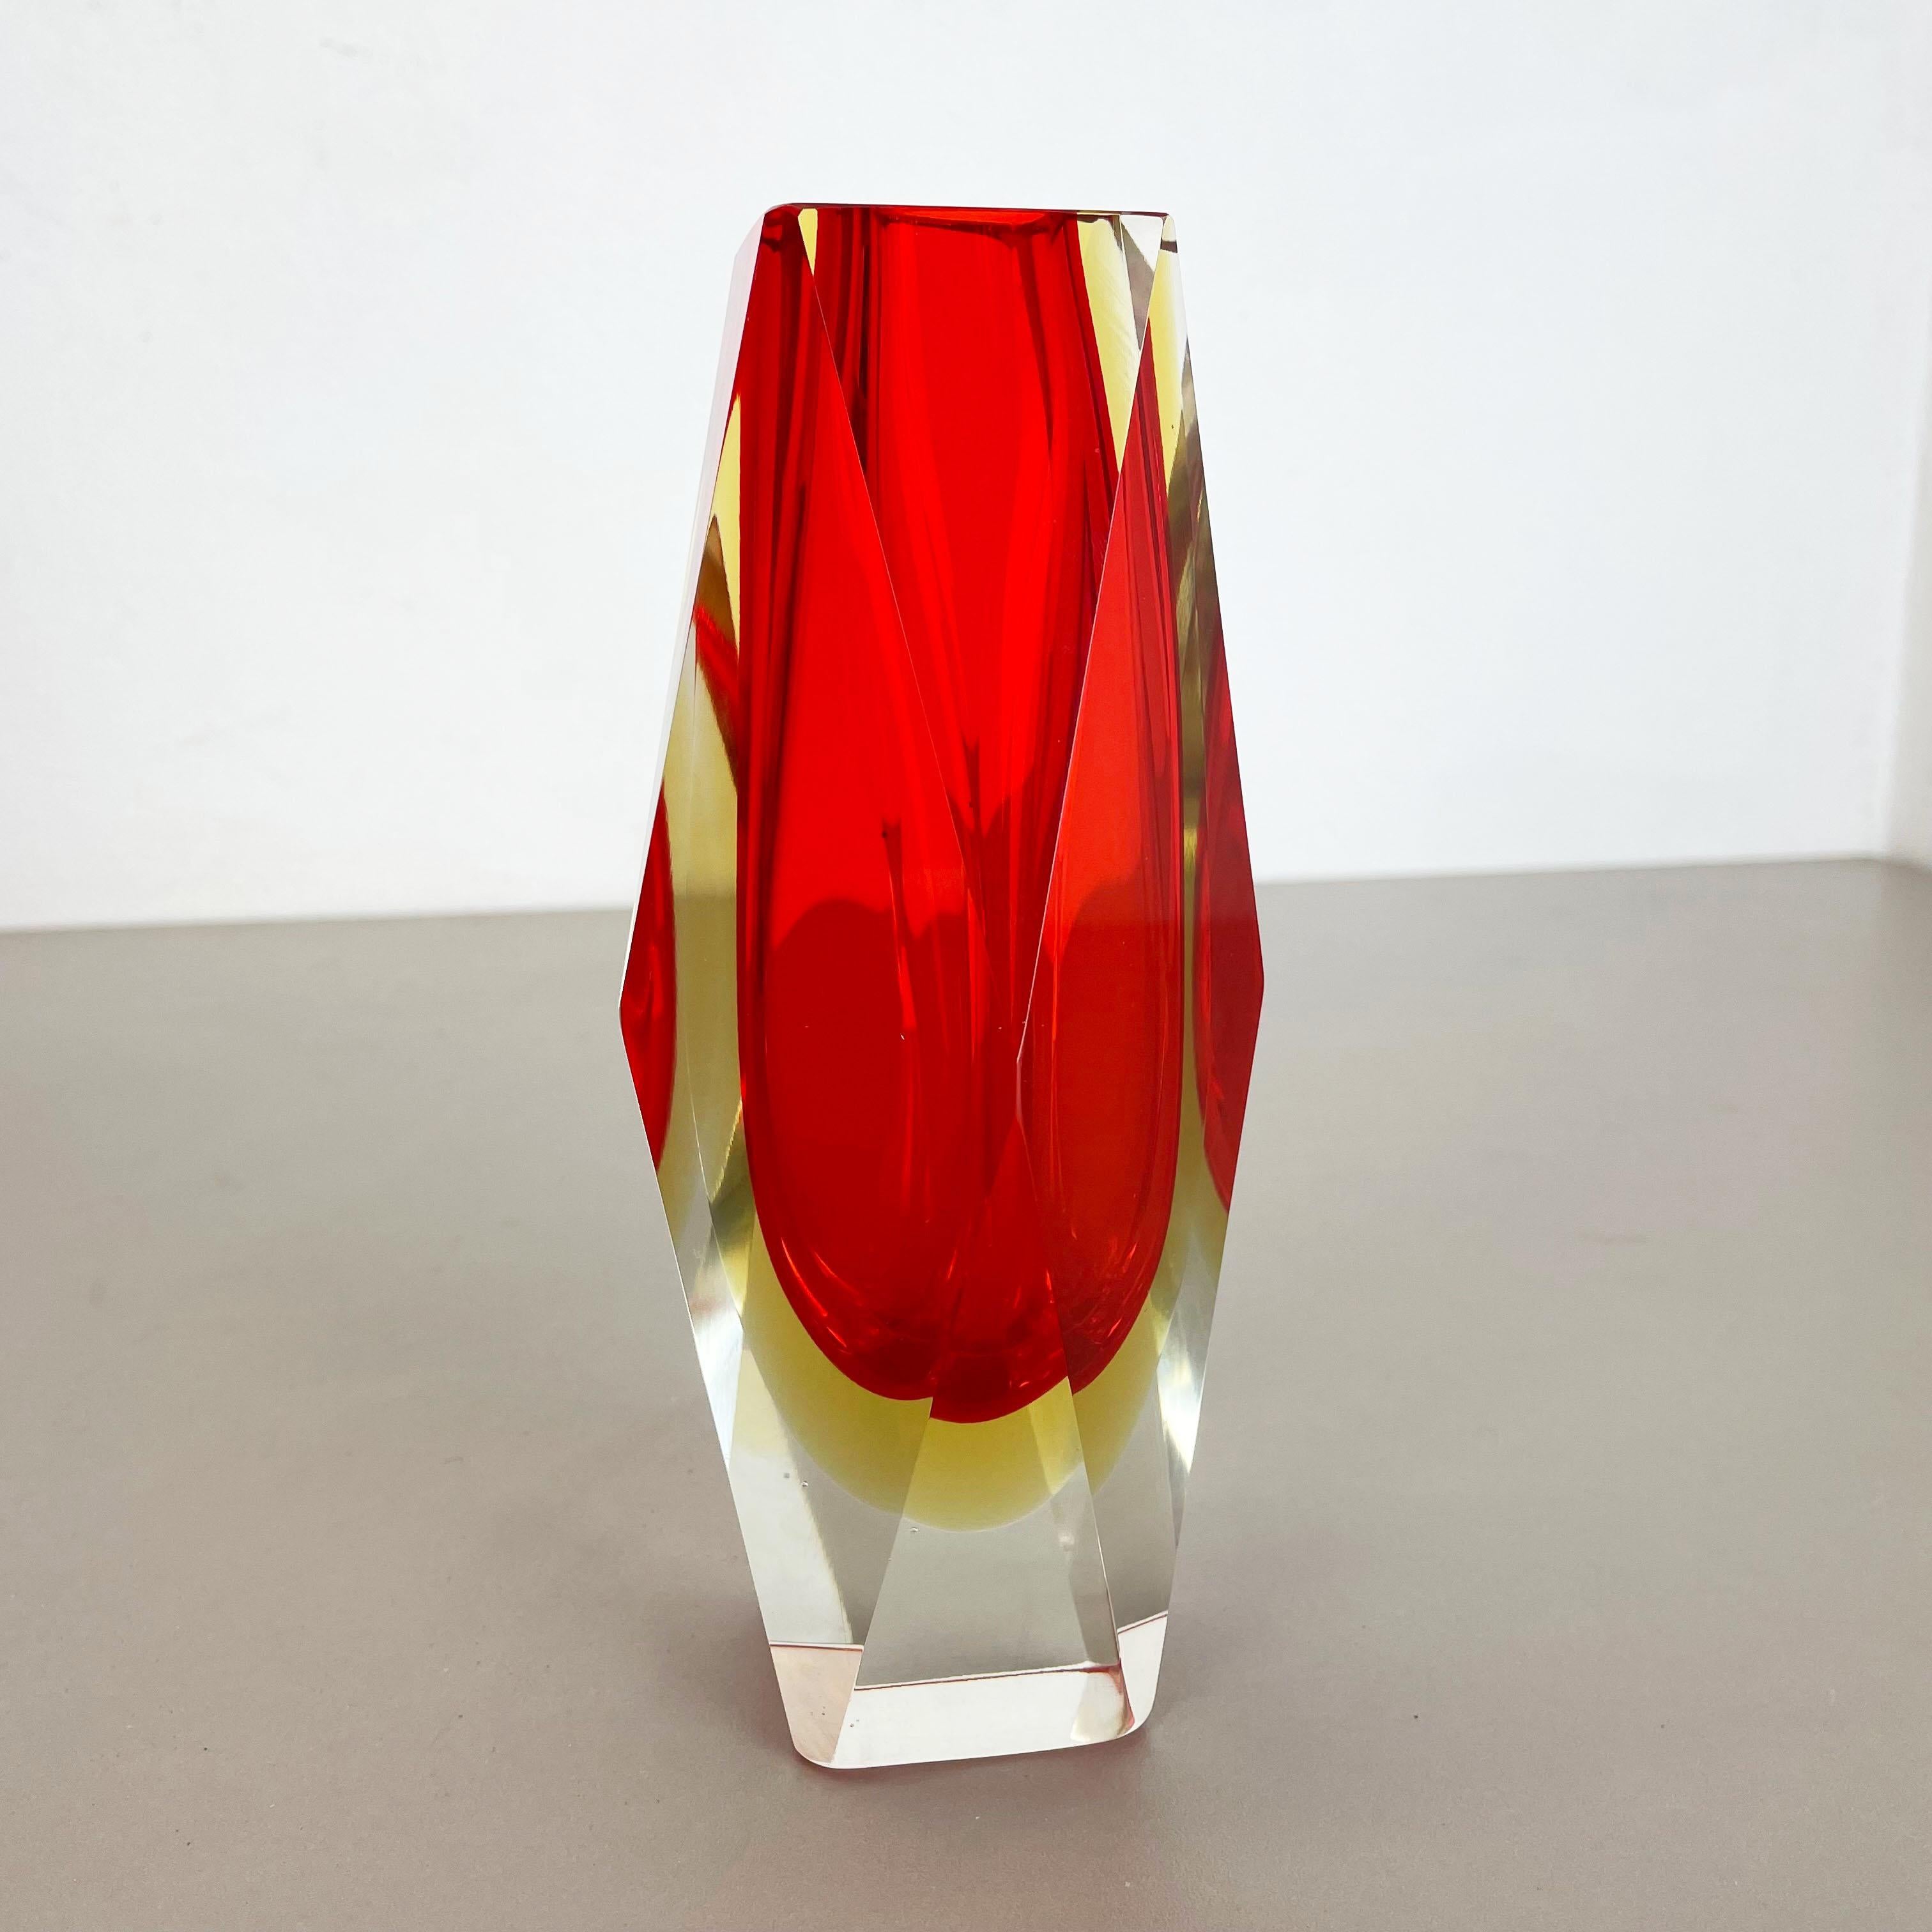 Large Red Murano Glass Sommerso Vase by Flavio Poli Attributed, Italy 1970s For Sale 8